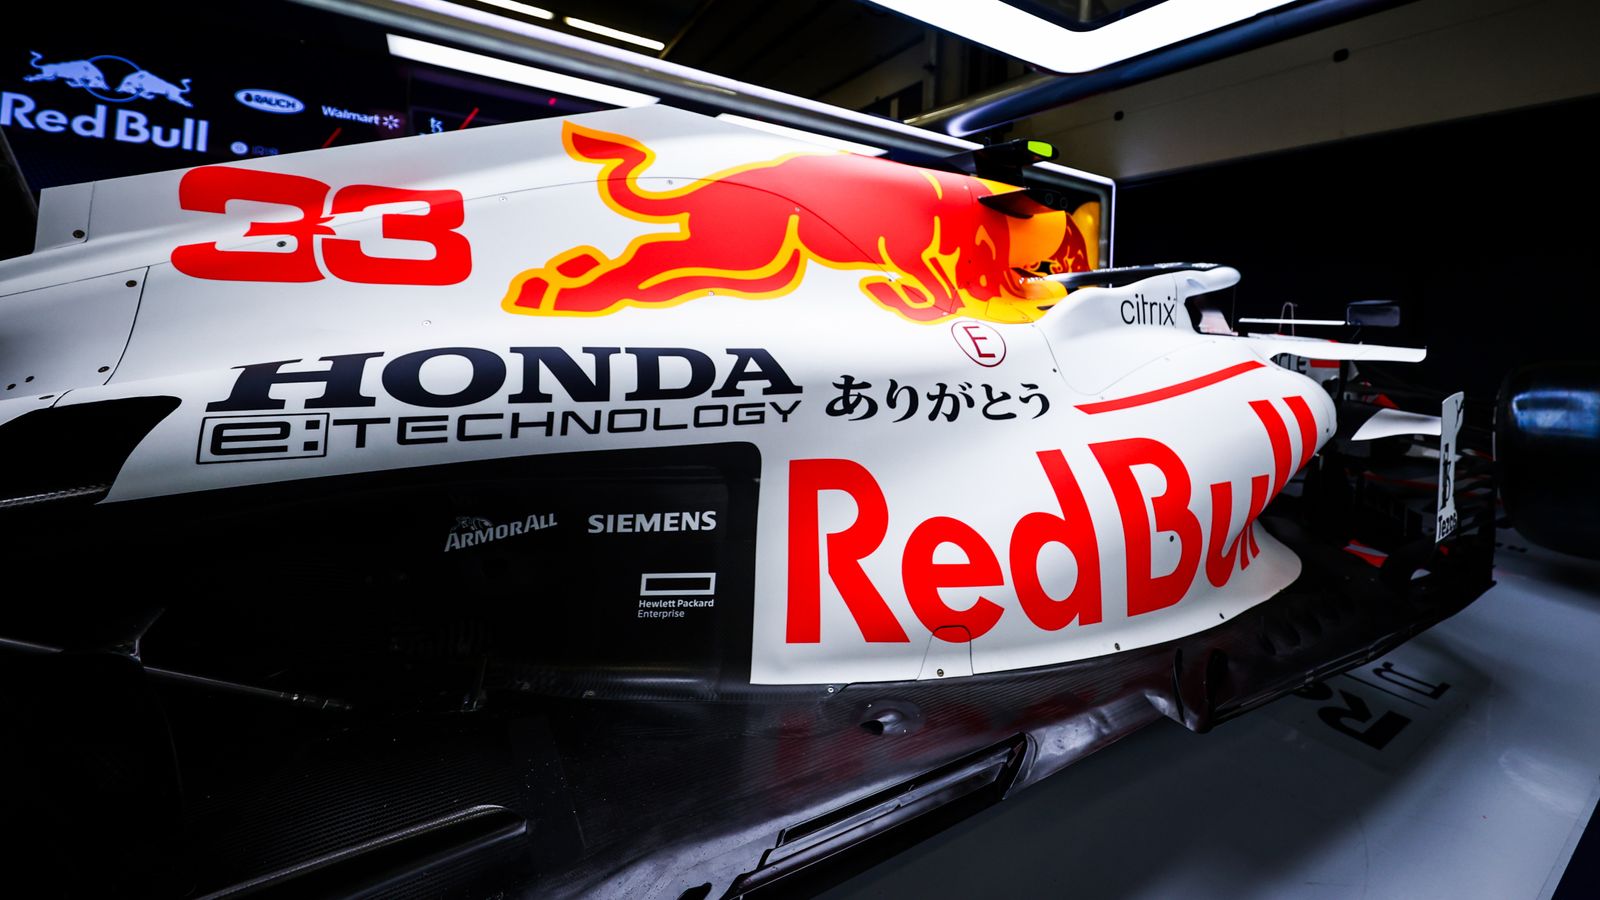 GP: Red Bull and AlphaTauri race with special Honda tribute liveries in Istanbul | F1 News